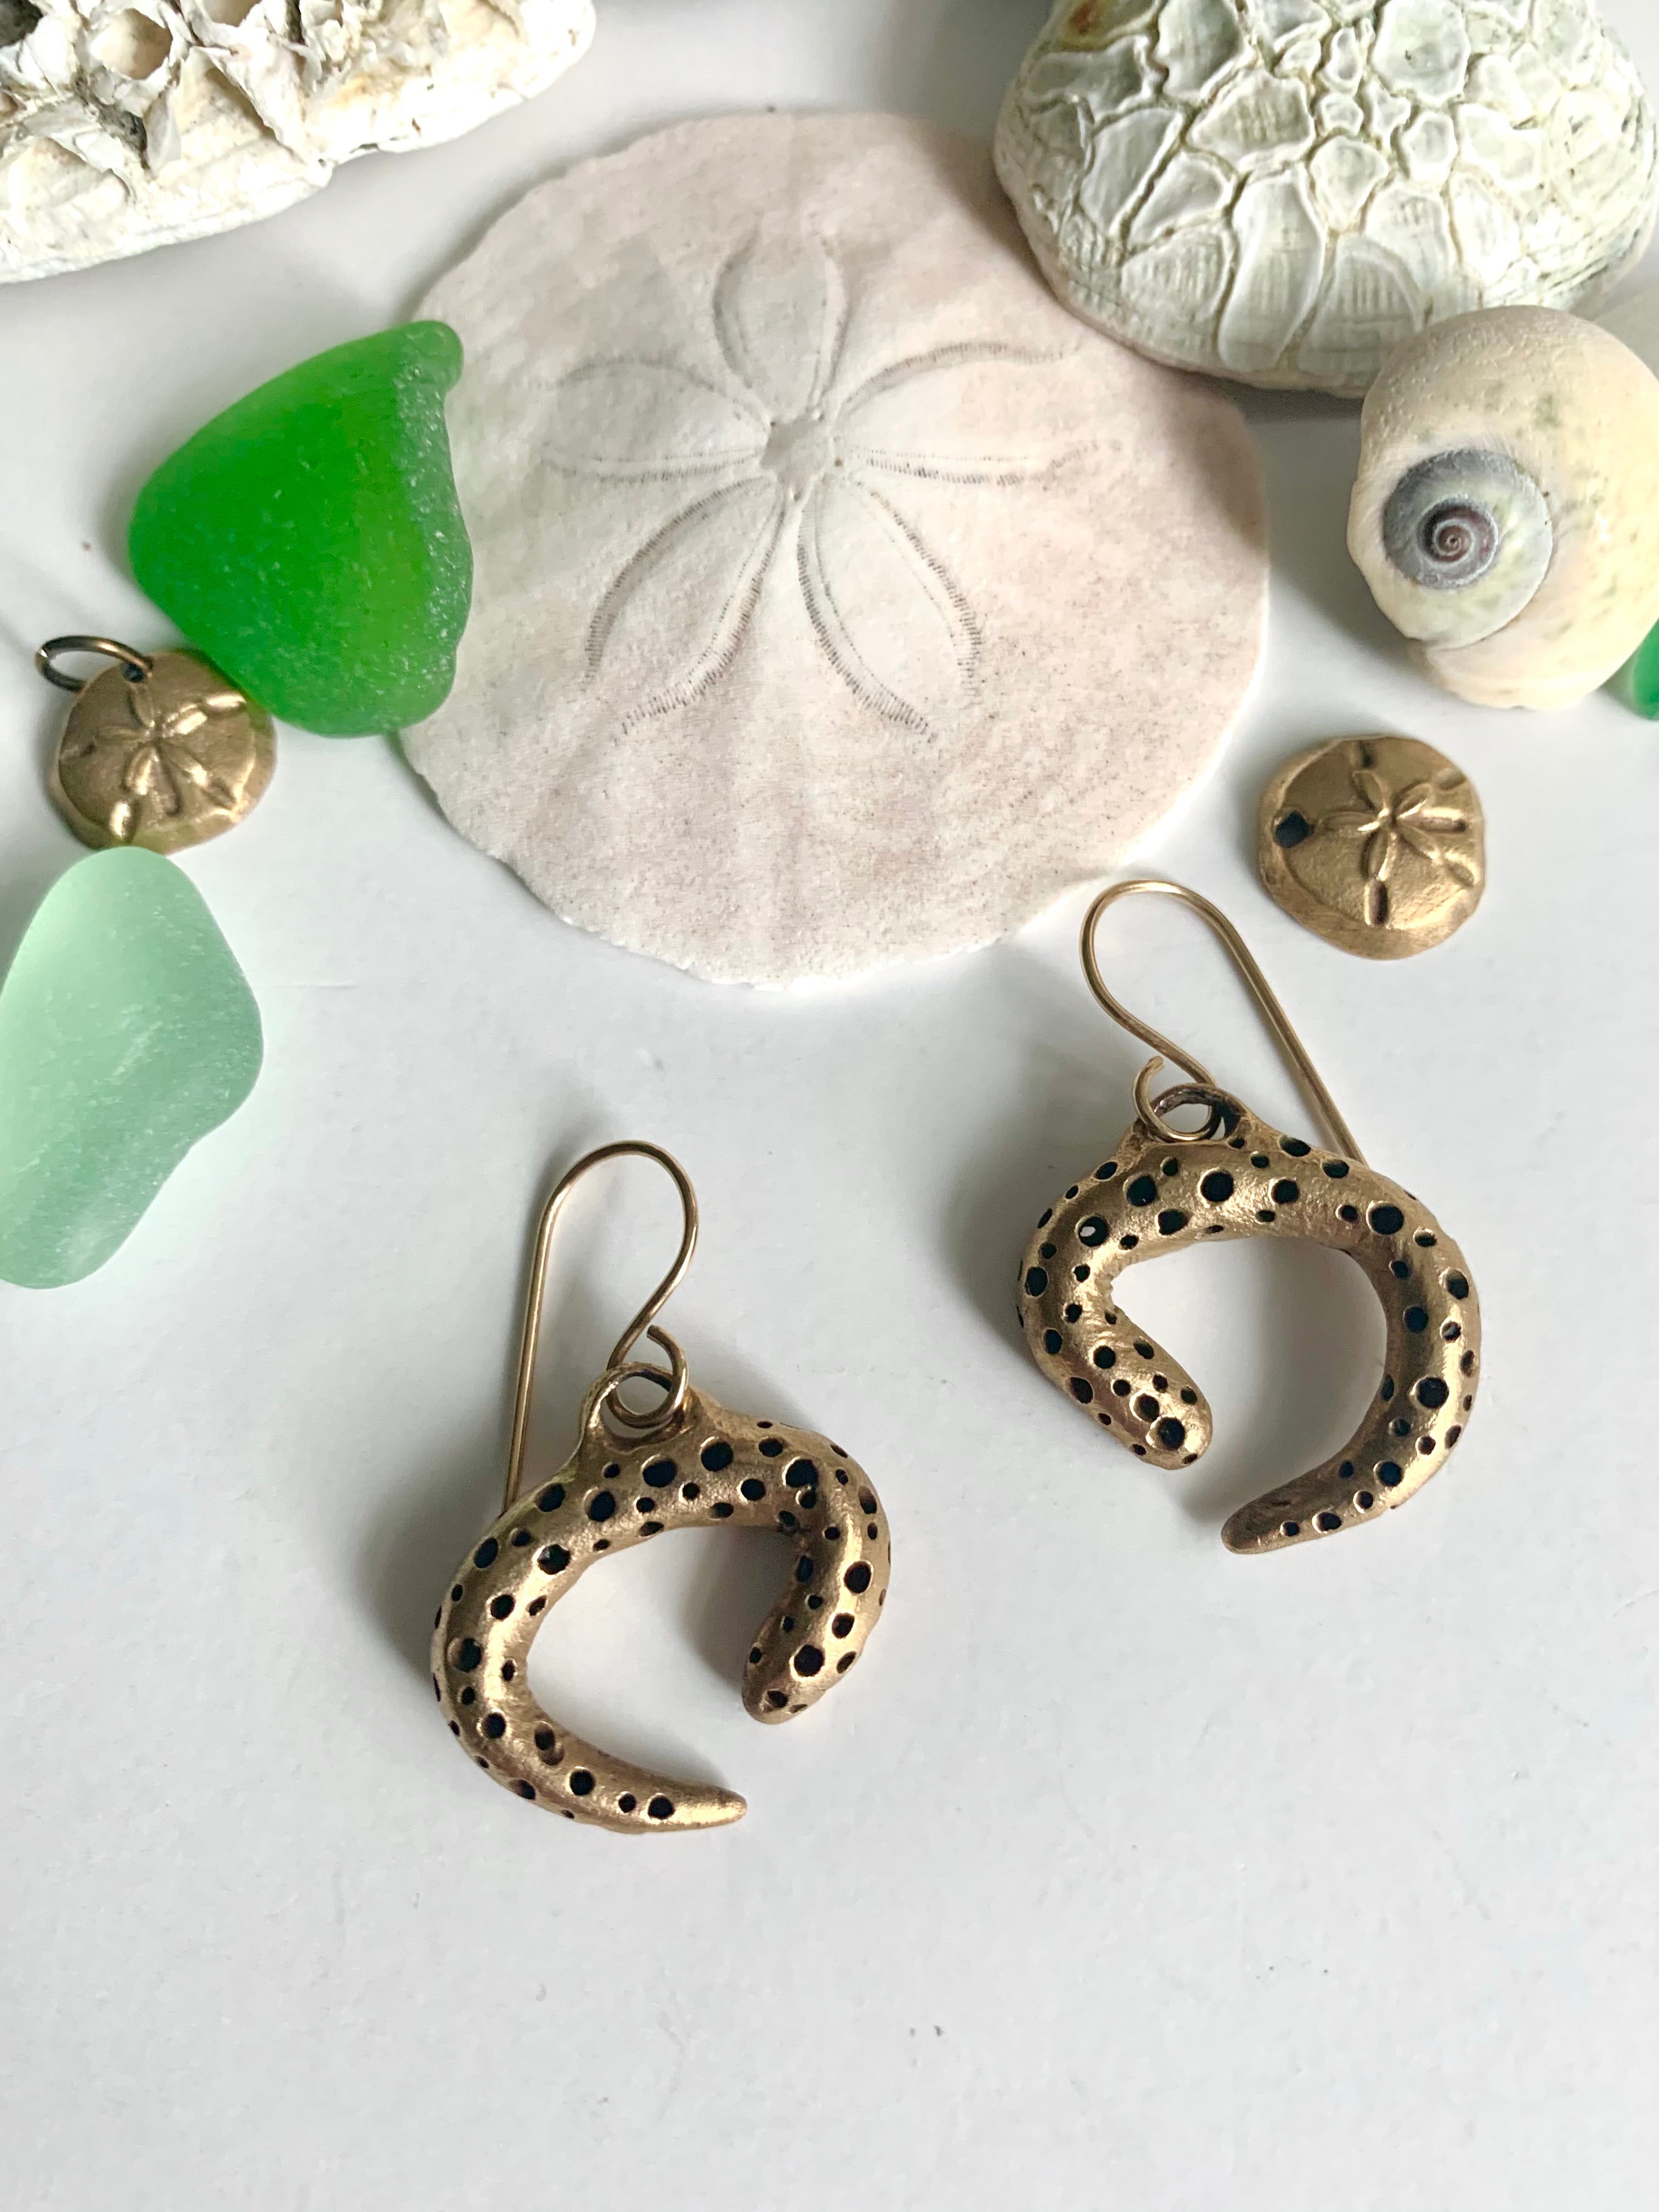 Bronze hand made curl earrings with seashells and glass